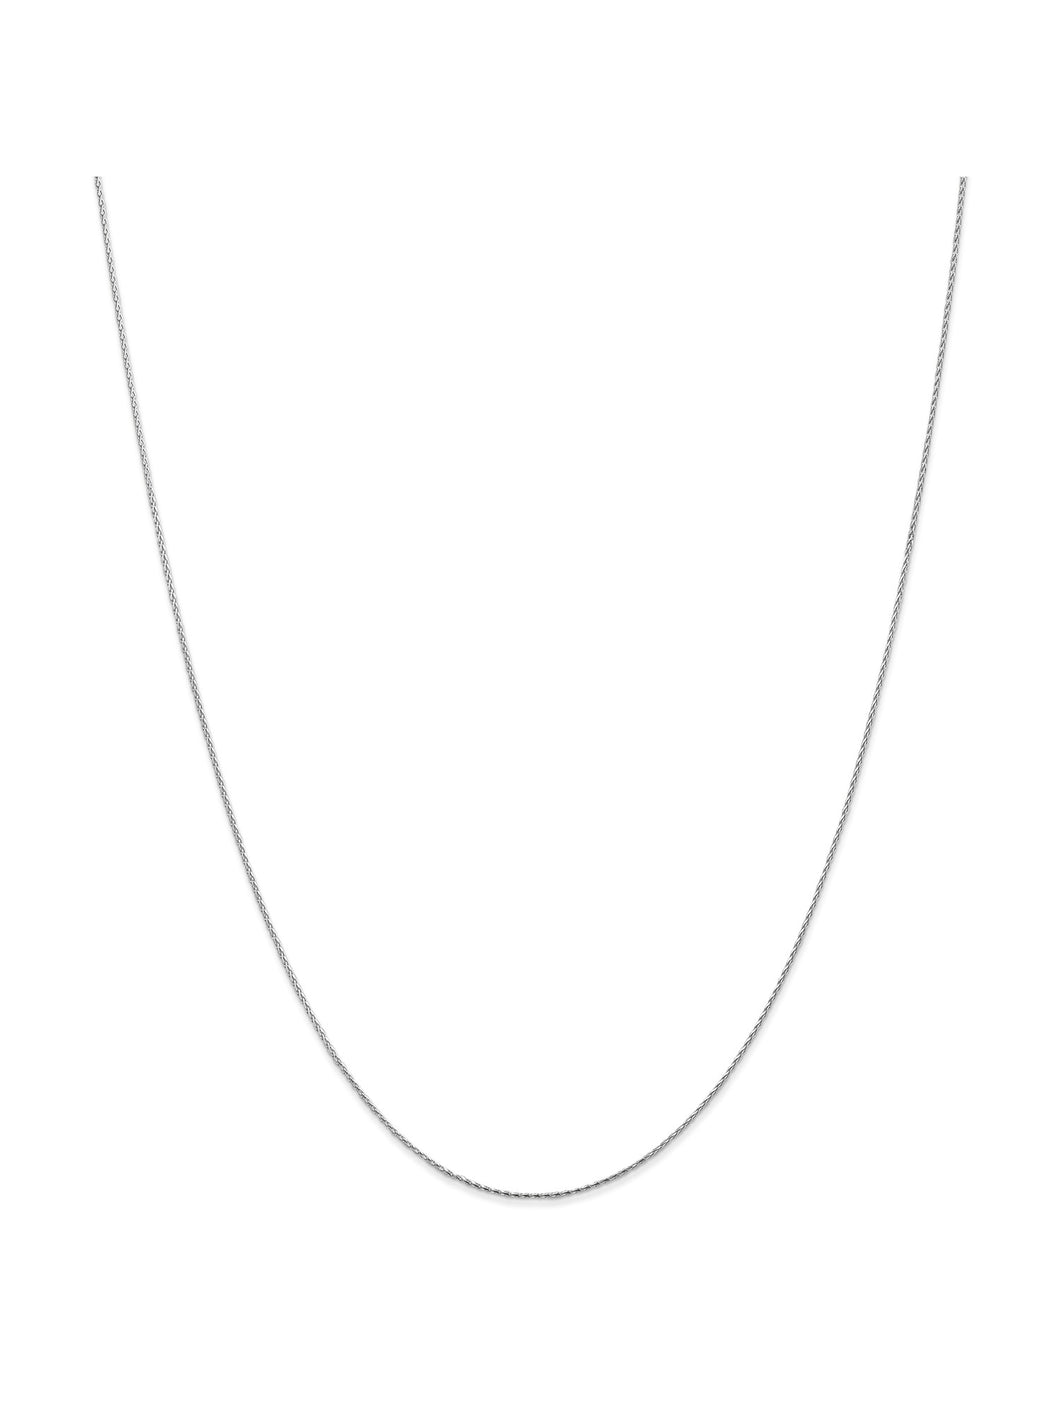 14k White Gold .85mm Wheat Chain Necklace